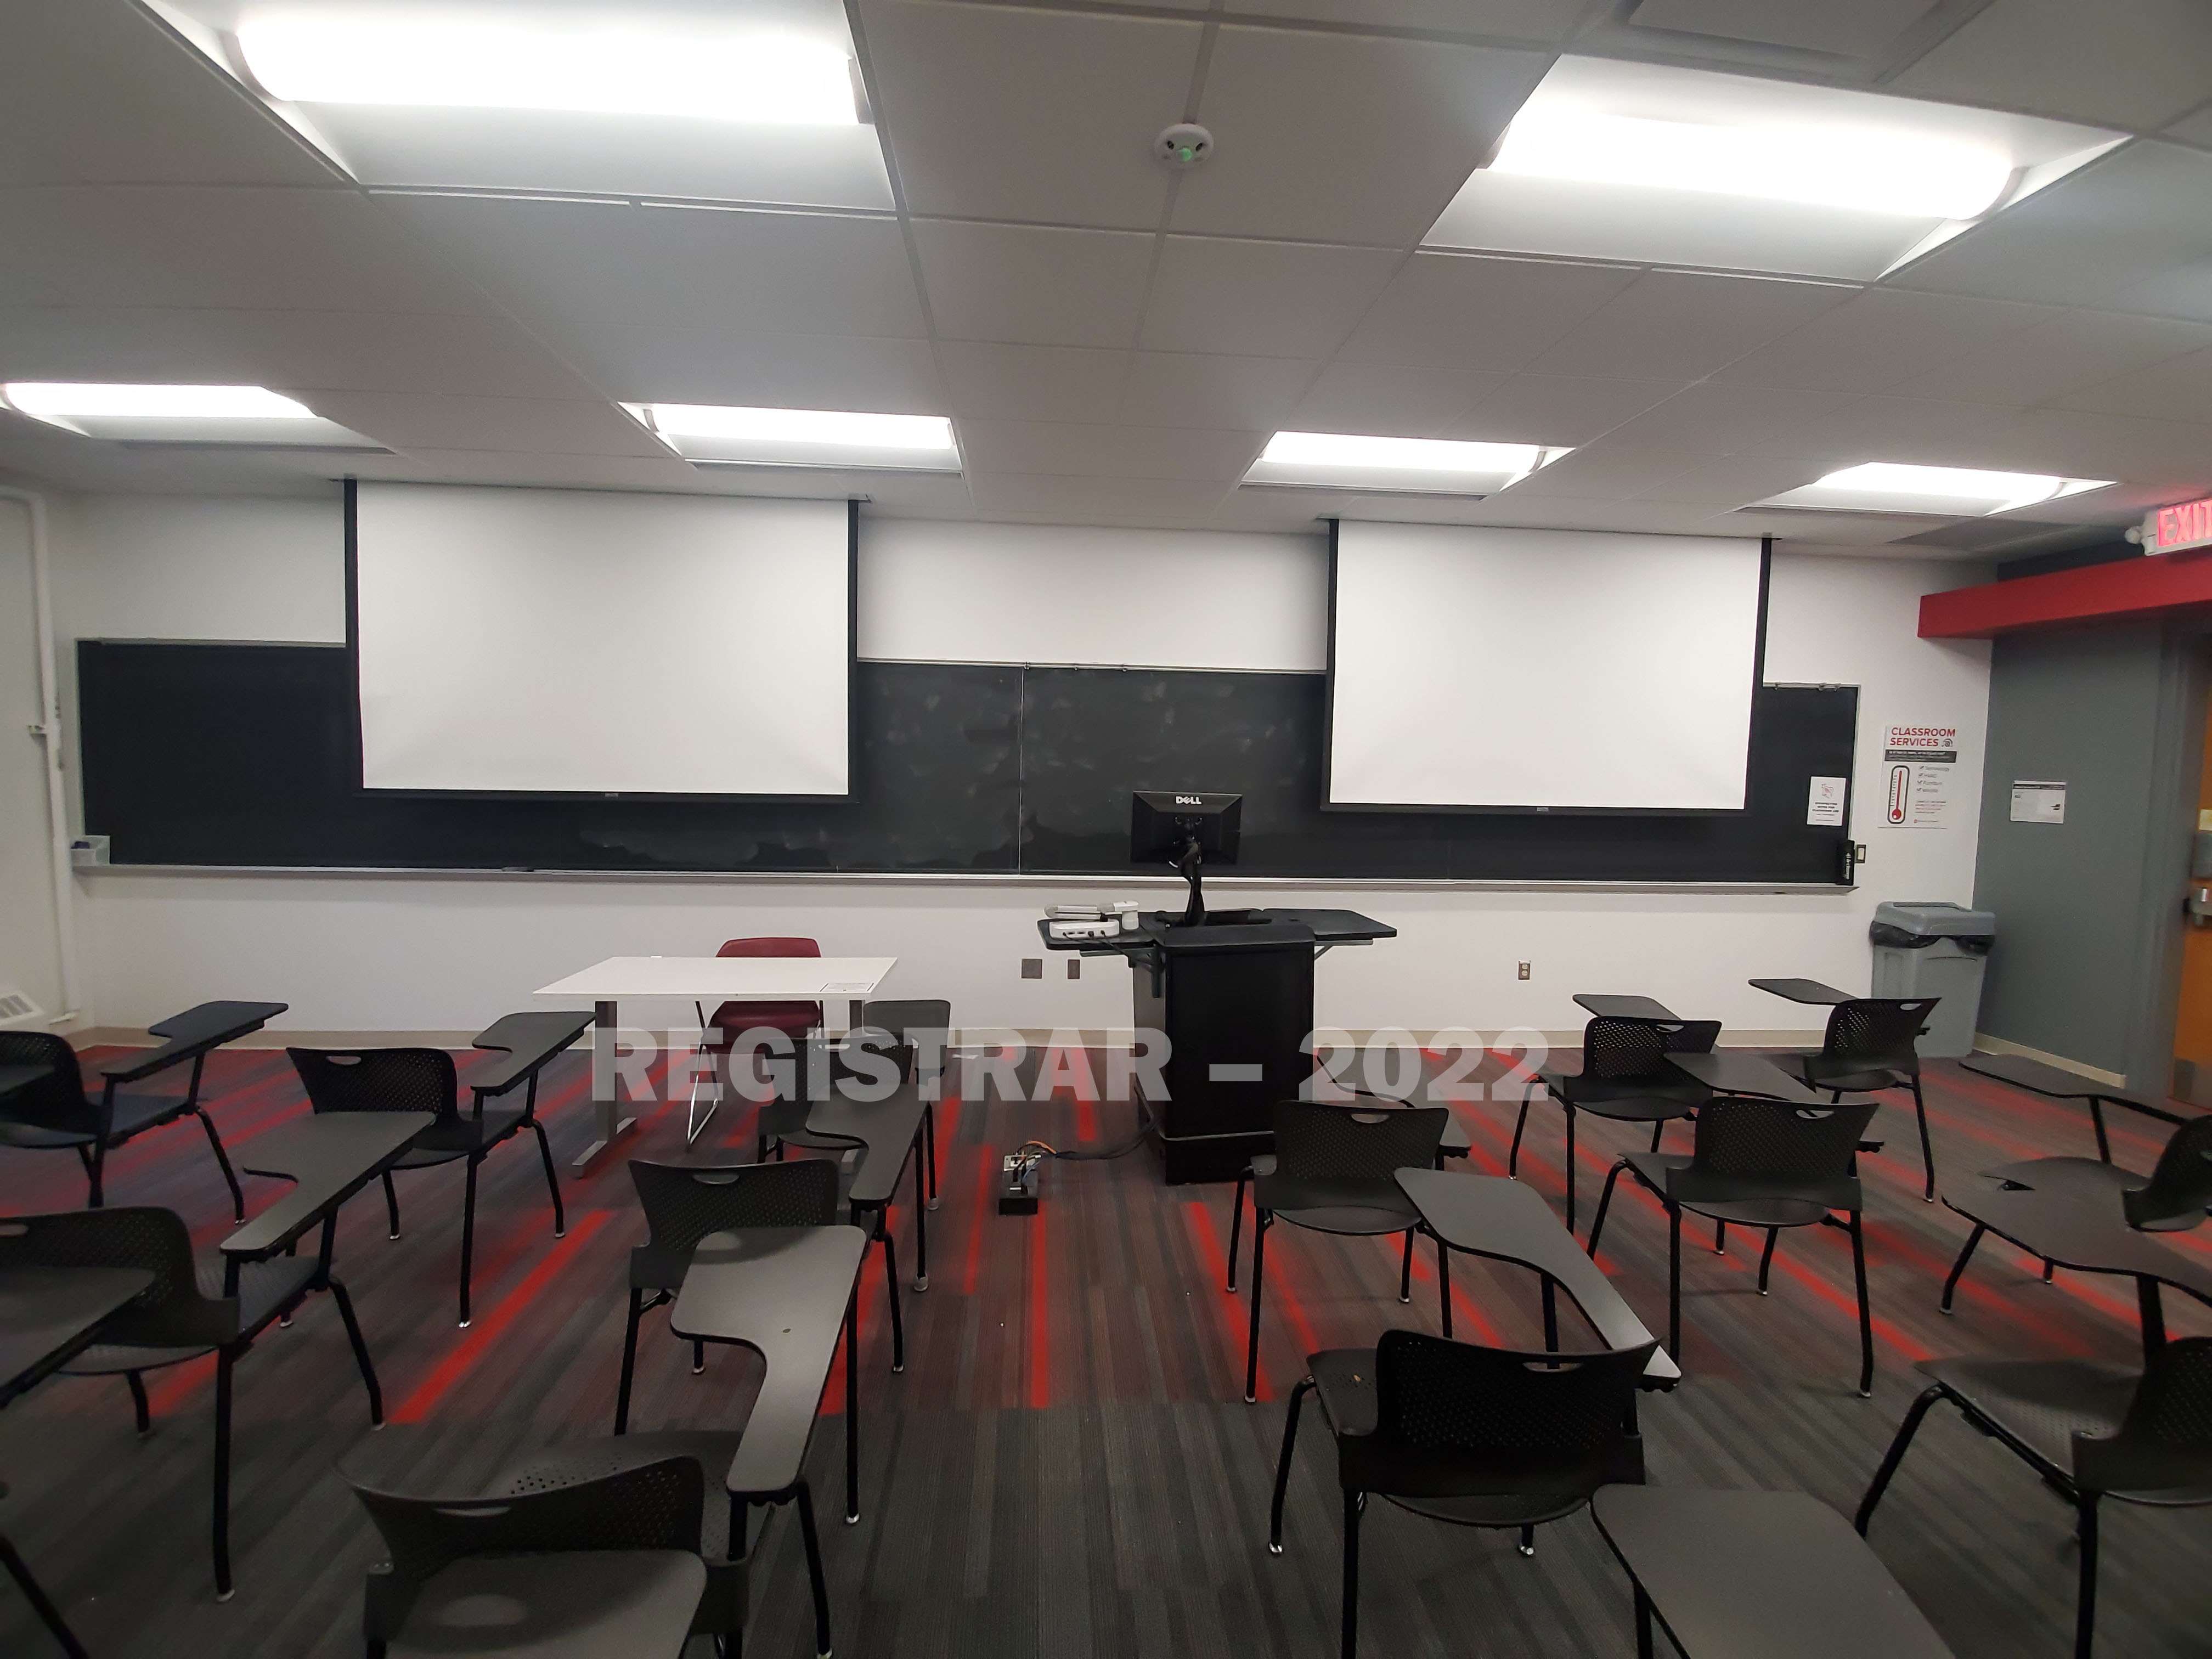 Baker Systems Engineering room 136 ultra wide angle view from the back of the room with projector screen down